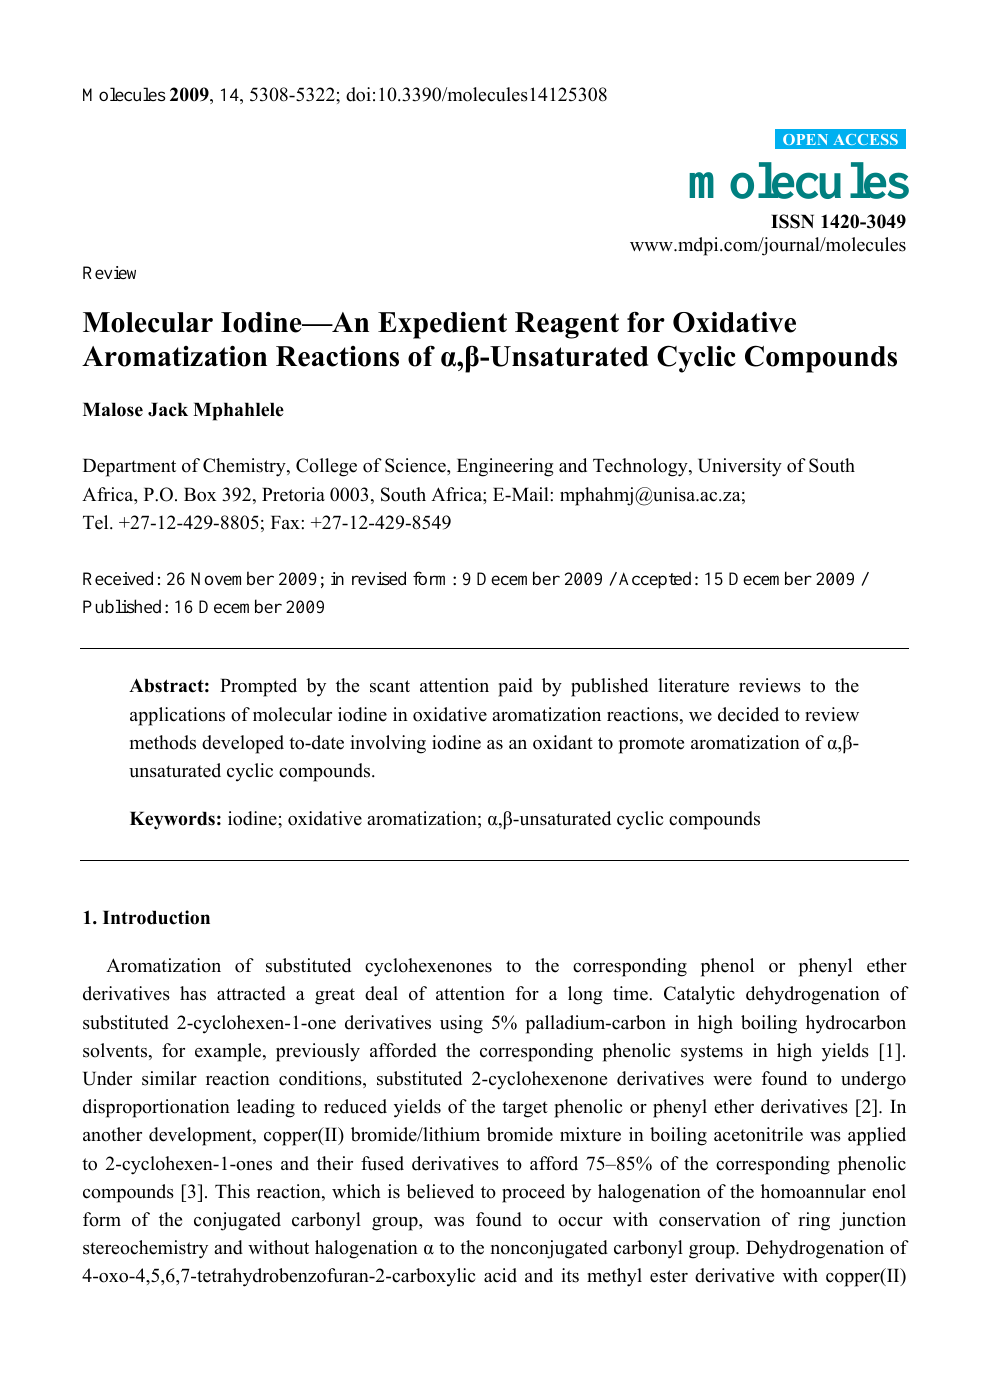 Molecular Iodine An Expedient Reagent For Oxidative Aromatization Reactions Of A B Unsaturated Cyclic Compounds Topic Of Research Paper In Chemical Sciences Download Scholarly Article Pdf And Read For Free On Cyberleninka Open Science